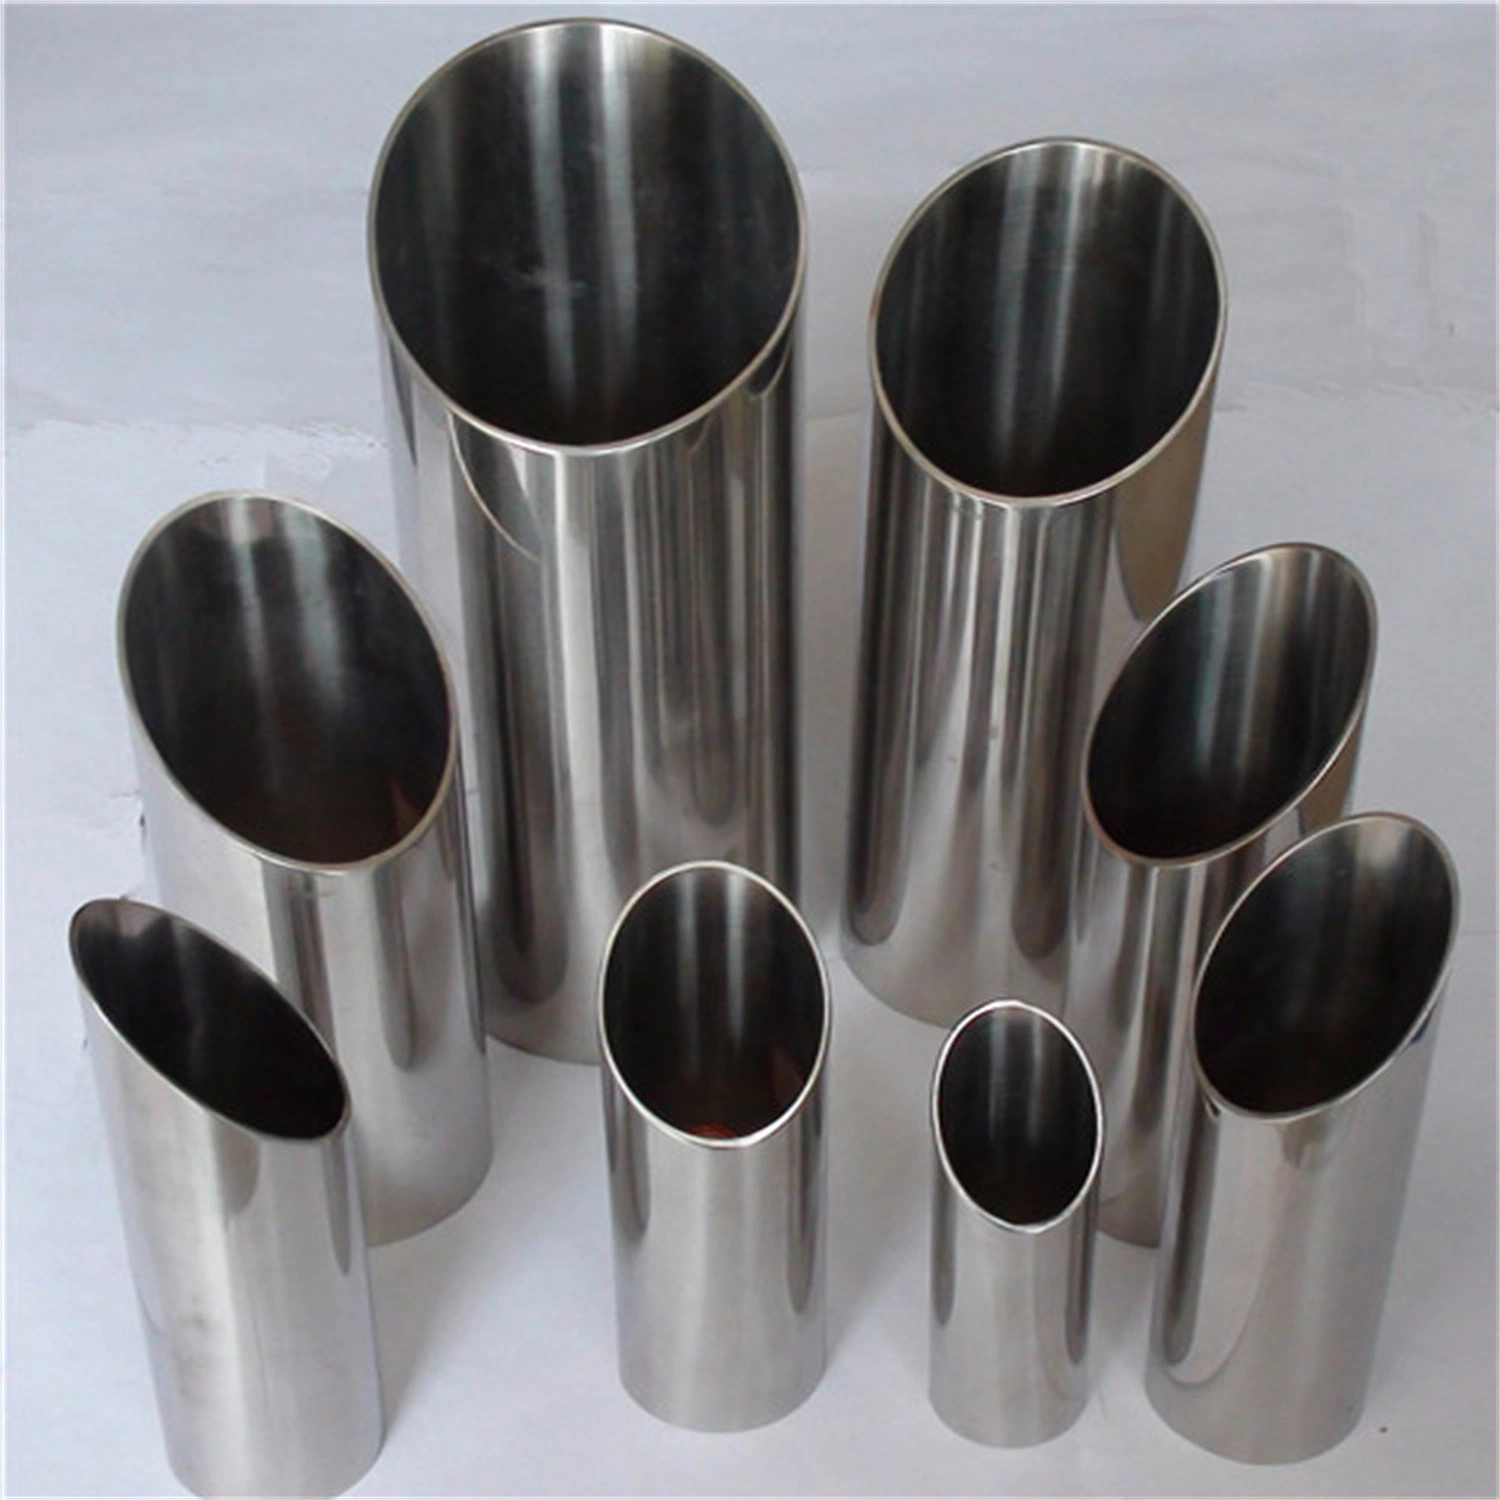 Hot Grade 201 304 316 430 316L 2250 Stainless Steel Welding Round Tubing Elbow Welded Ss Seamless Hose Building Materials Tubes